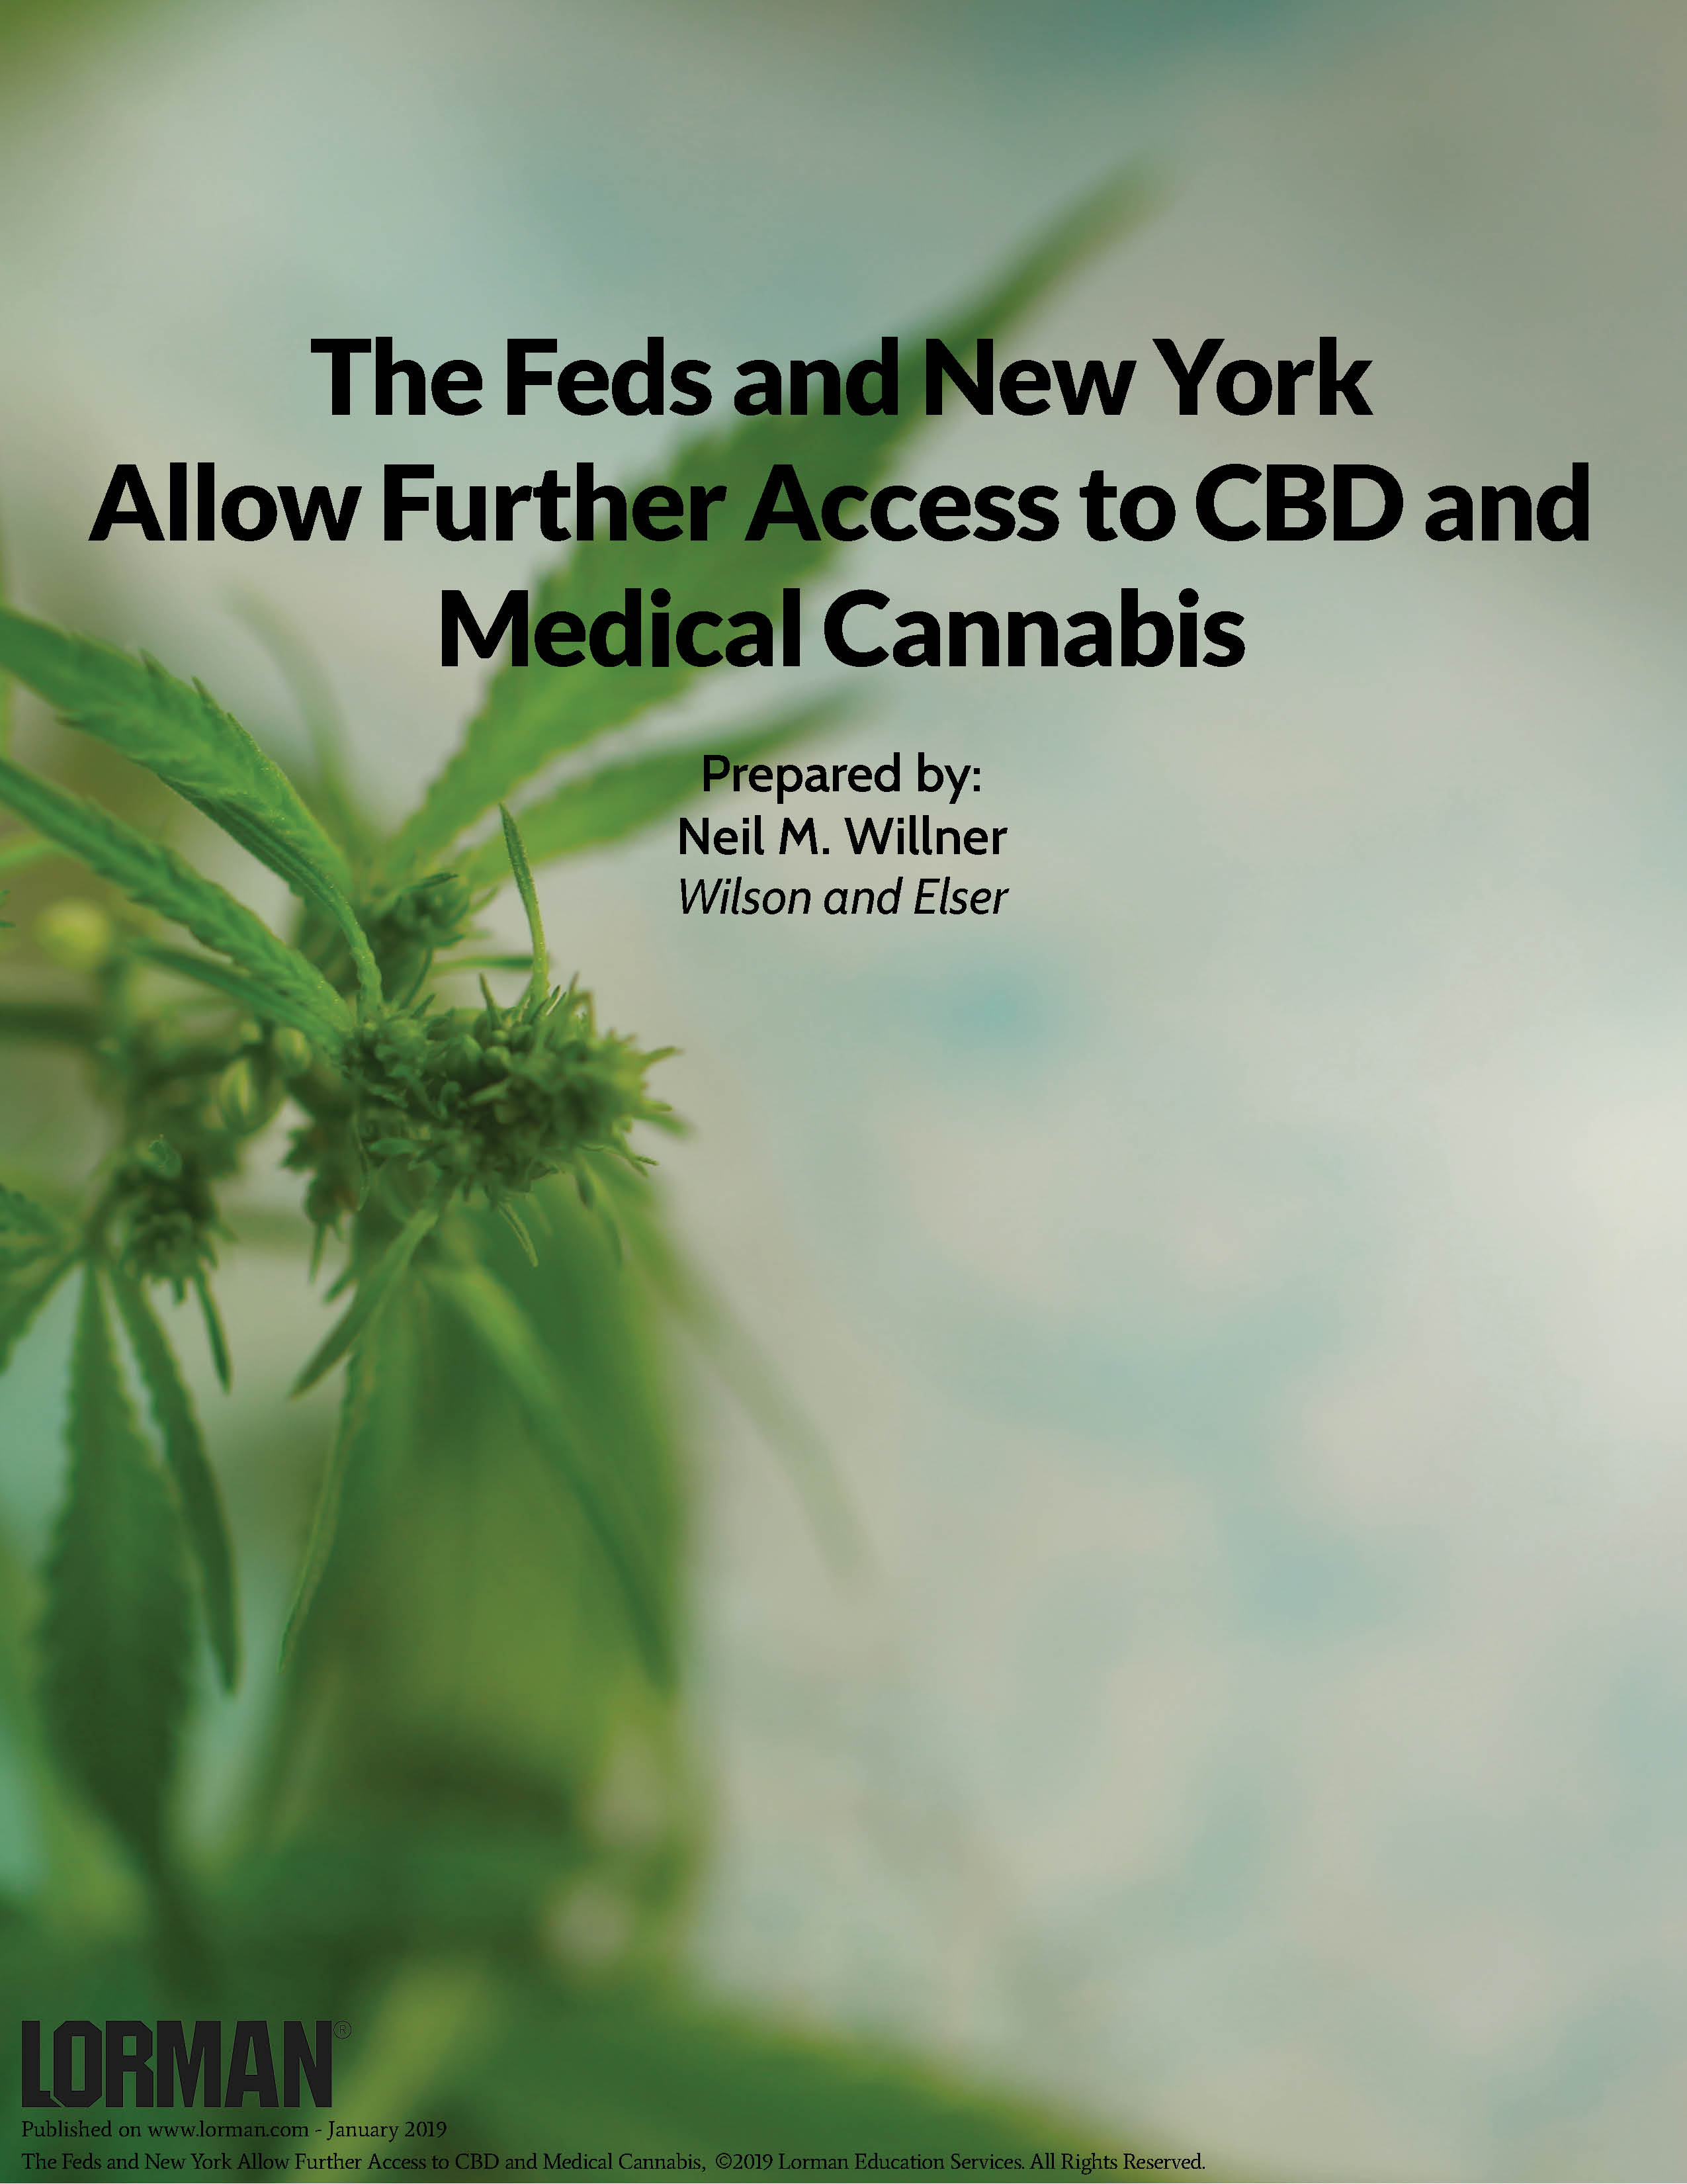 The Feds and New York Allow Further Access to CBD and Medical Cannabis